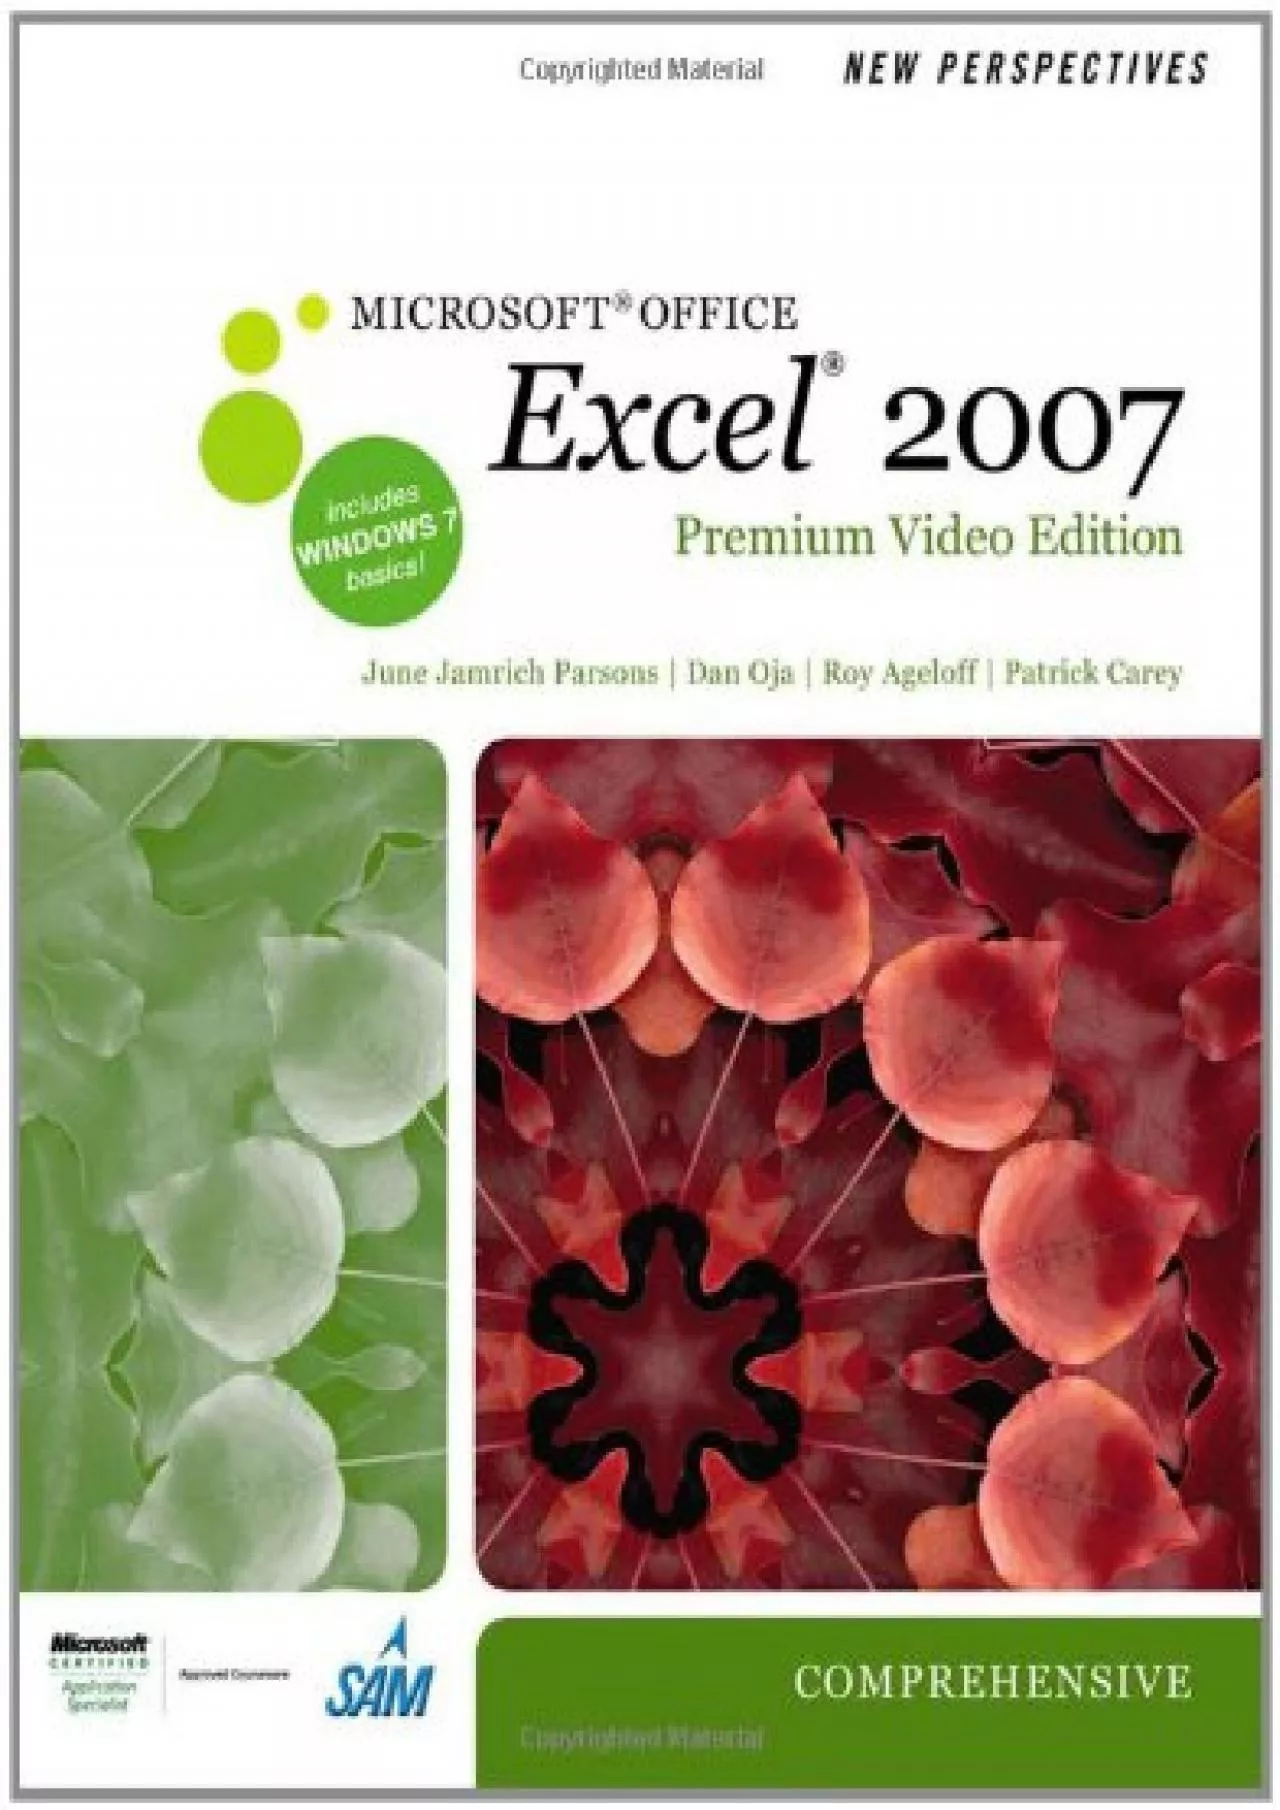 (BOOK)-New Perspectives on Microsoft Office Excel 2007, Comprehensive, Premium Video Edition